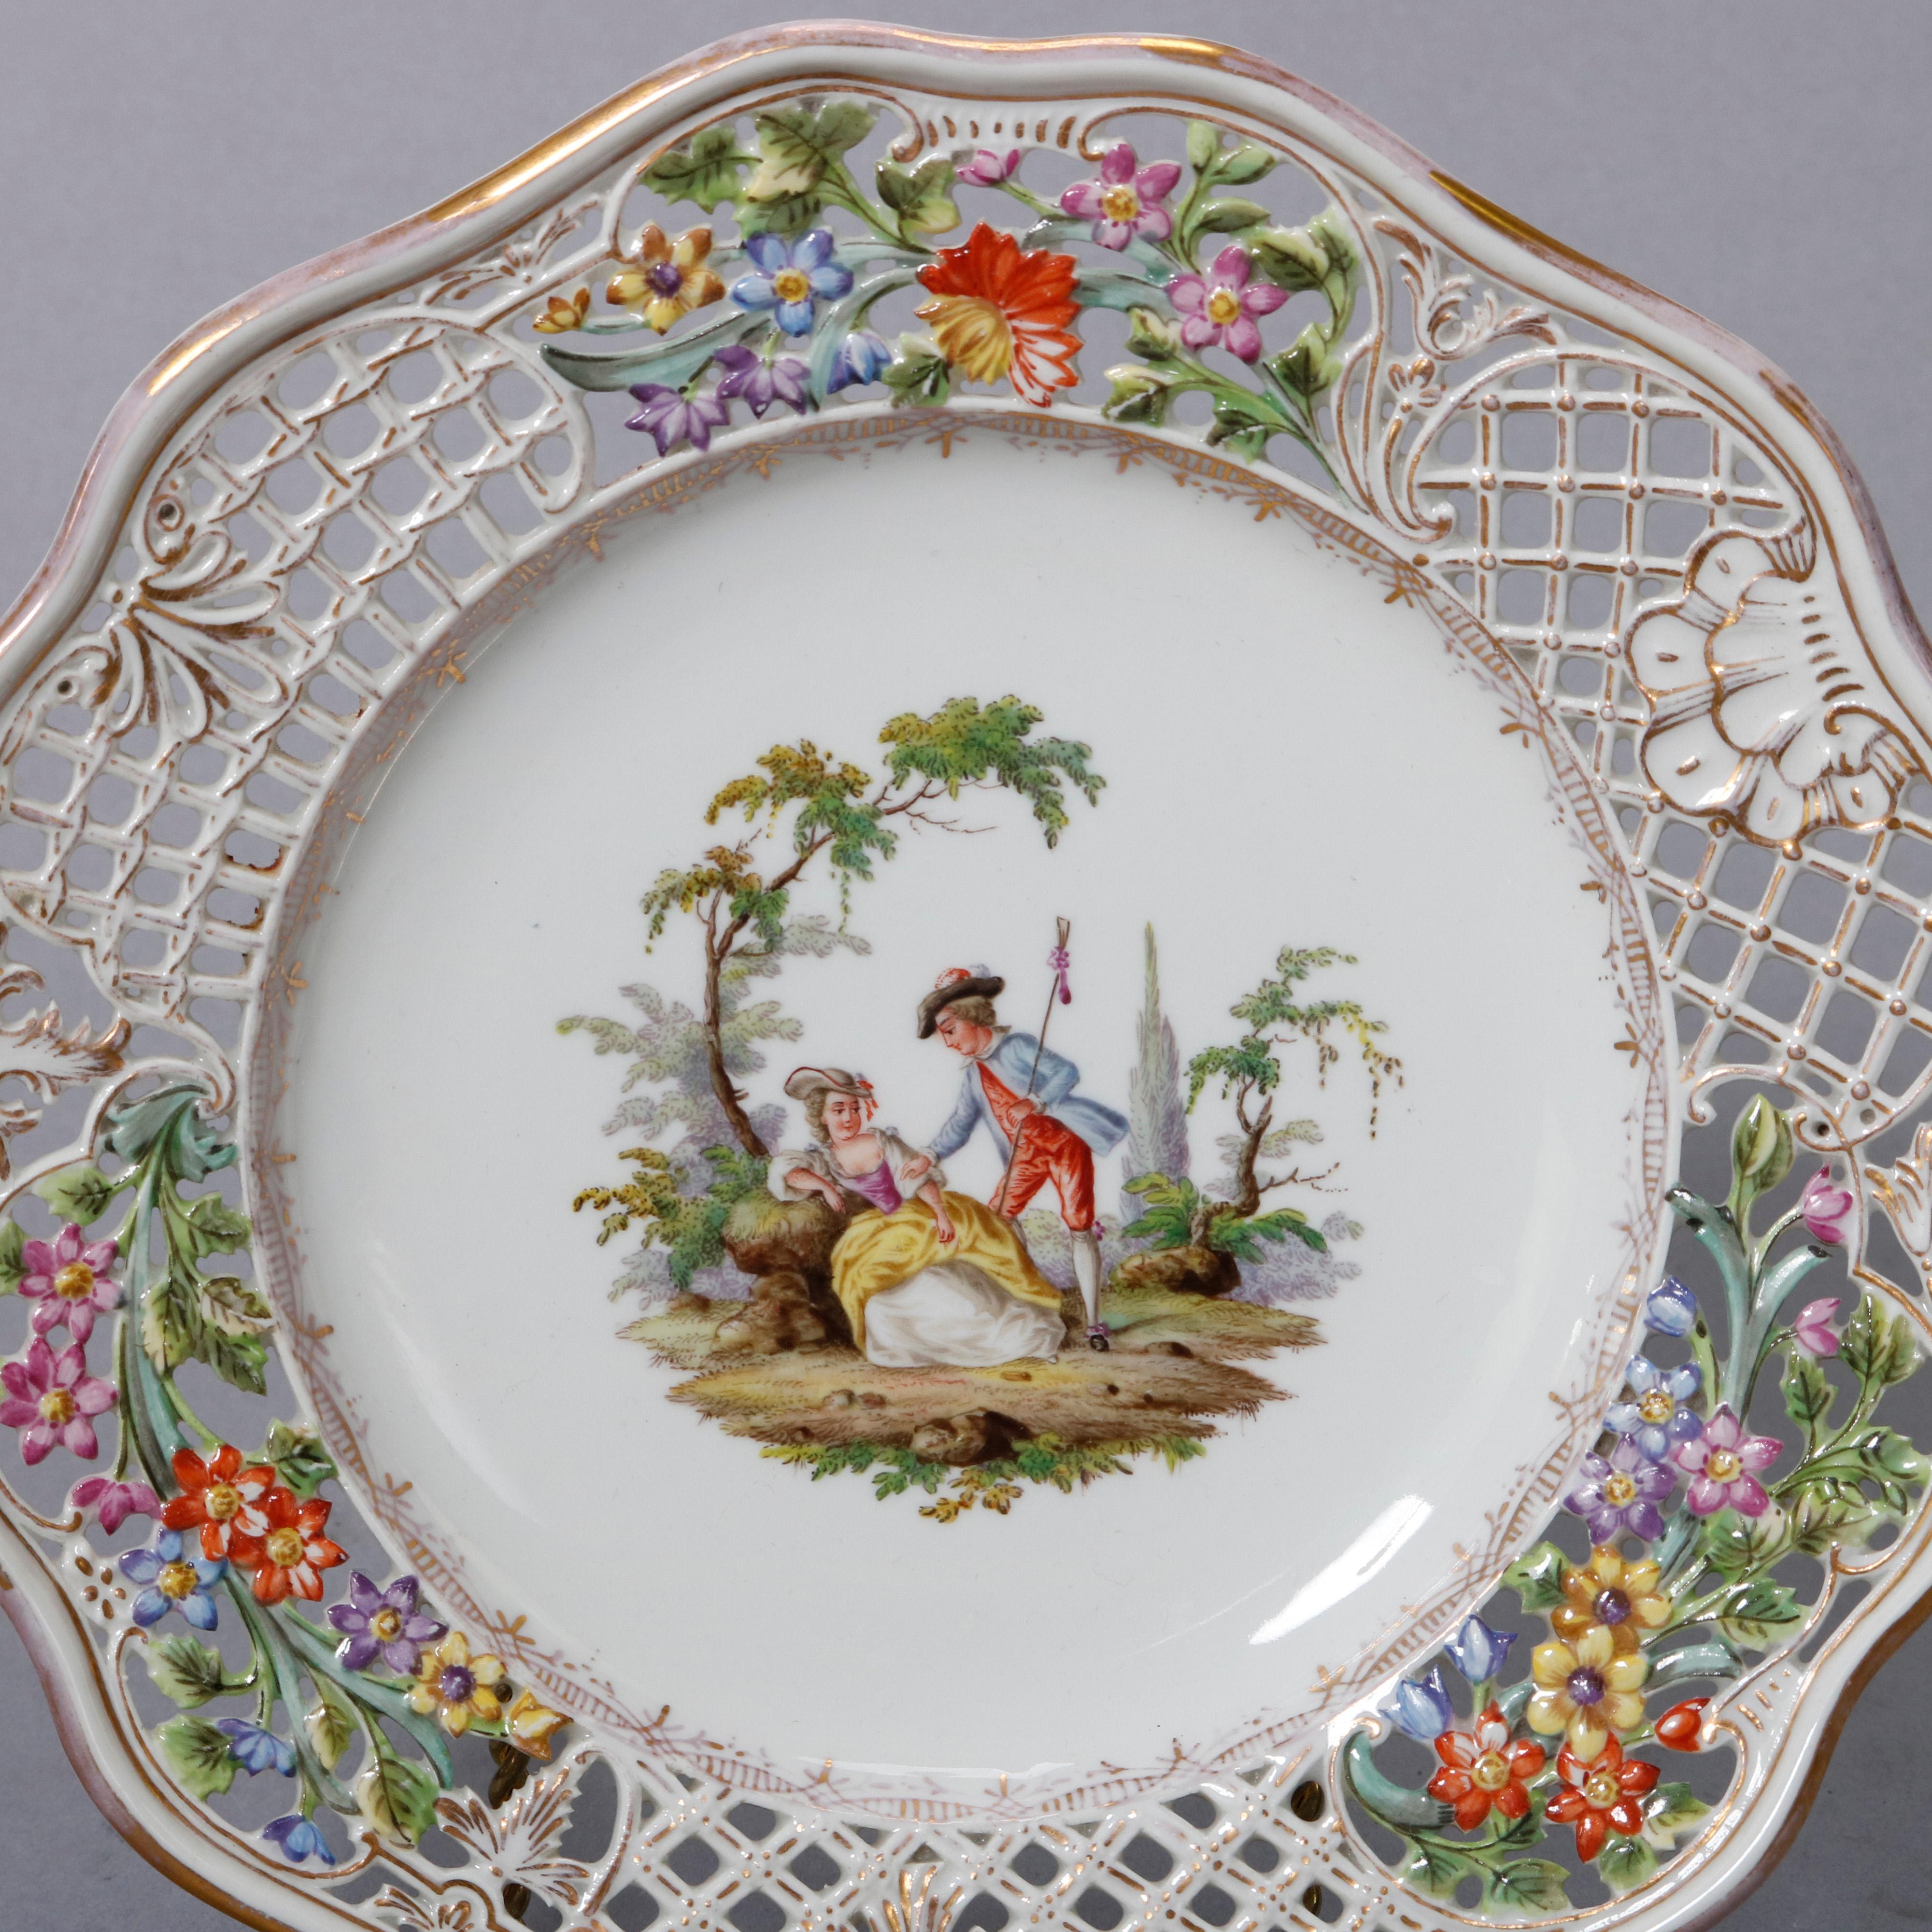 An antique pair of German porcelain plates by Meissen offer central hand painted courting scenes in countryside settings with scalloped and reticulated rim having basket weave pattern with floral reserves, gilt highlights throughout and en verso